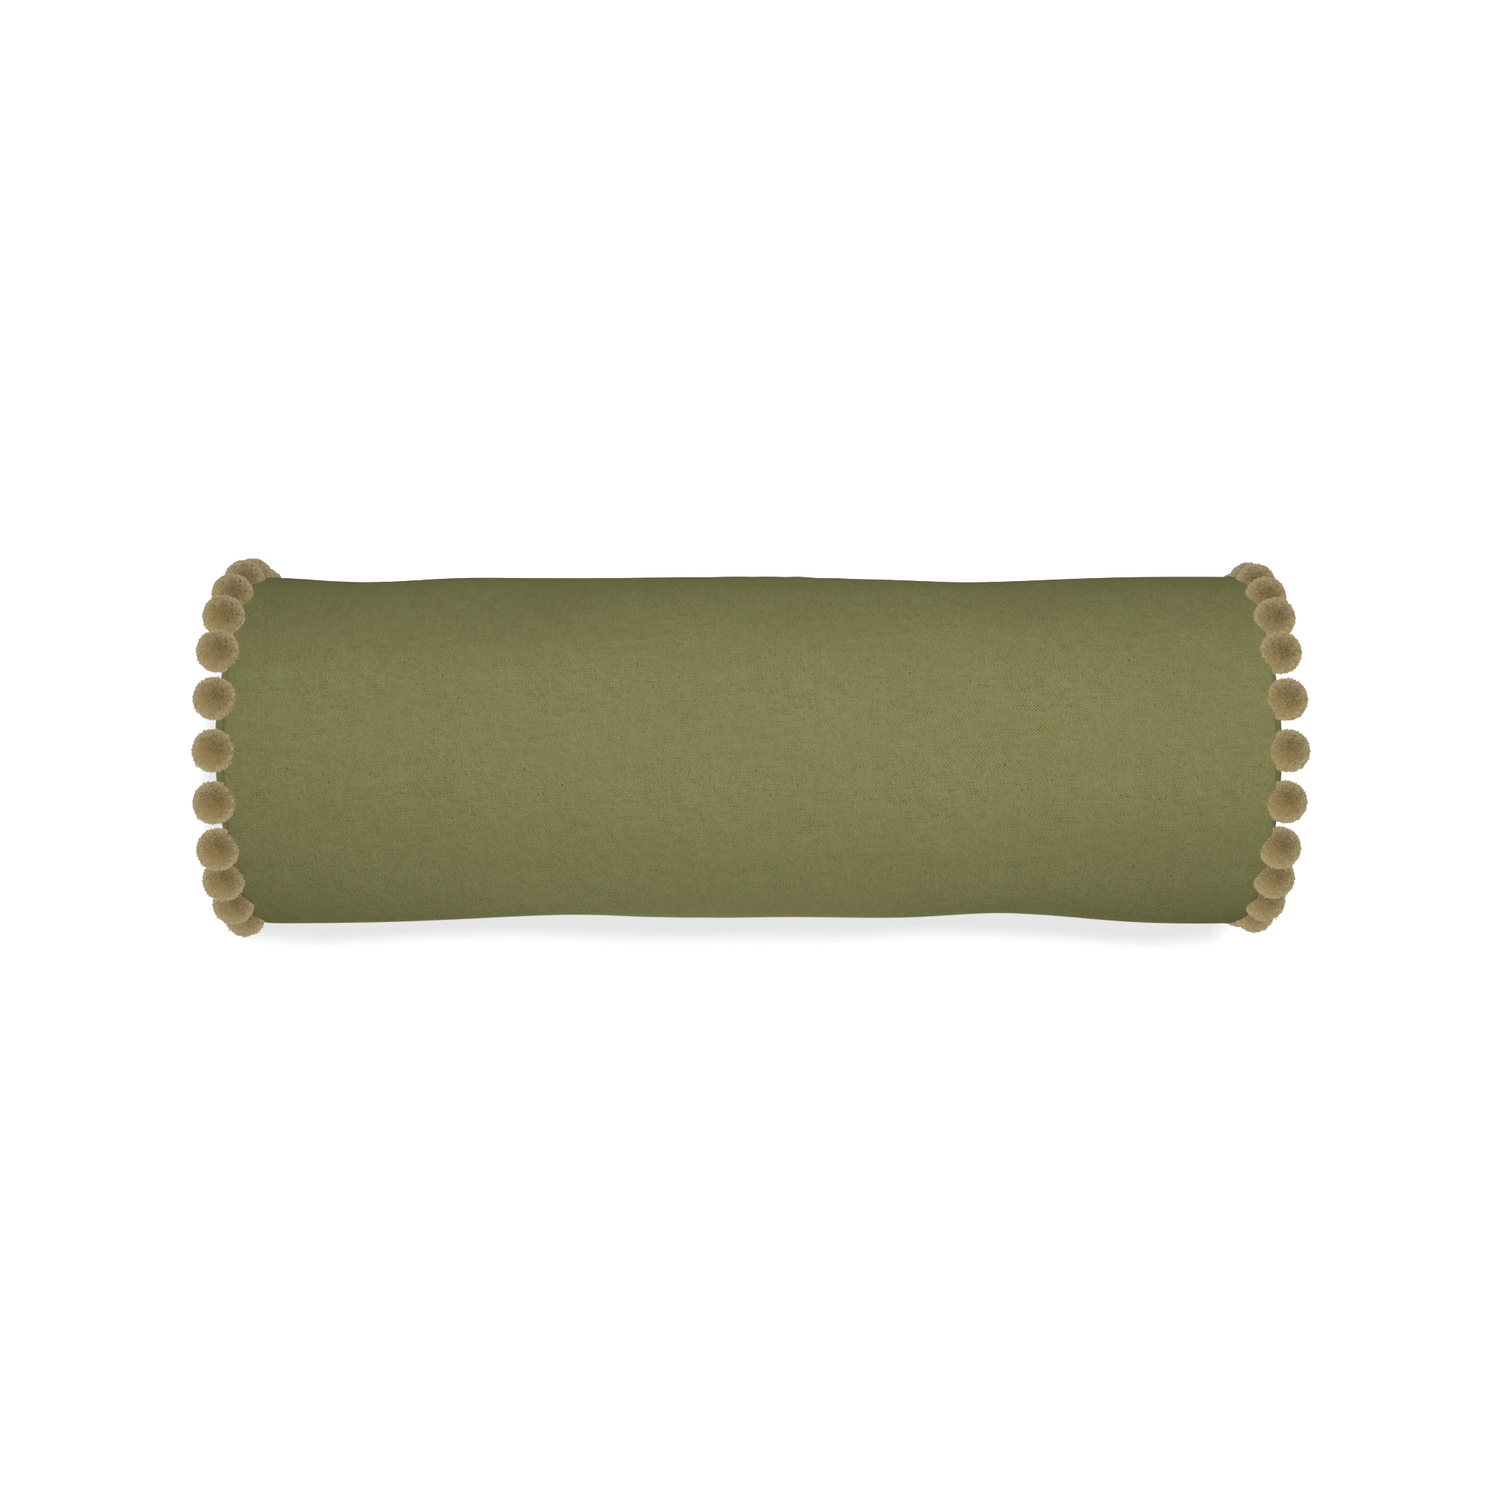 Bolster moss custom moss greenpillow with olive pom pom on white background